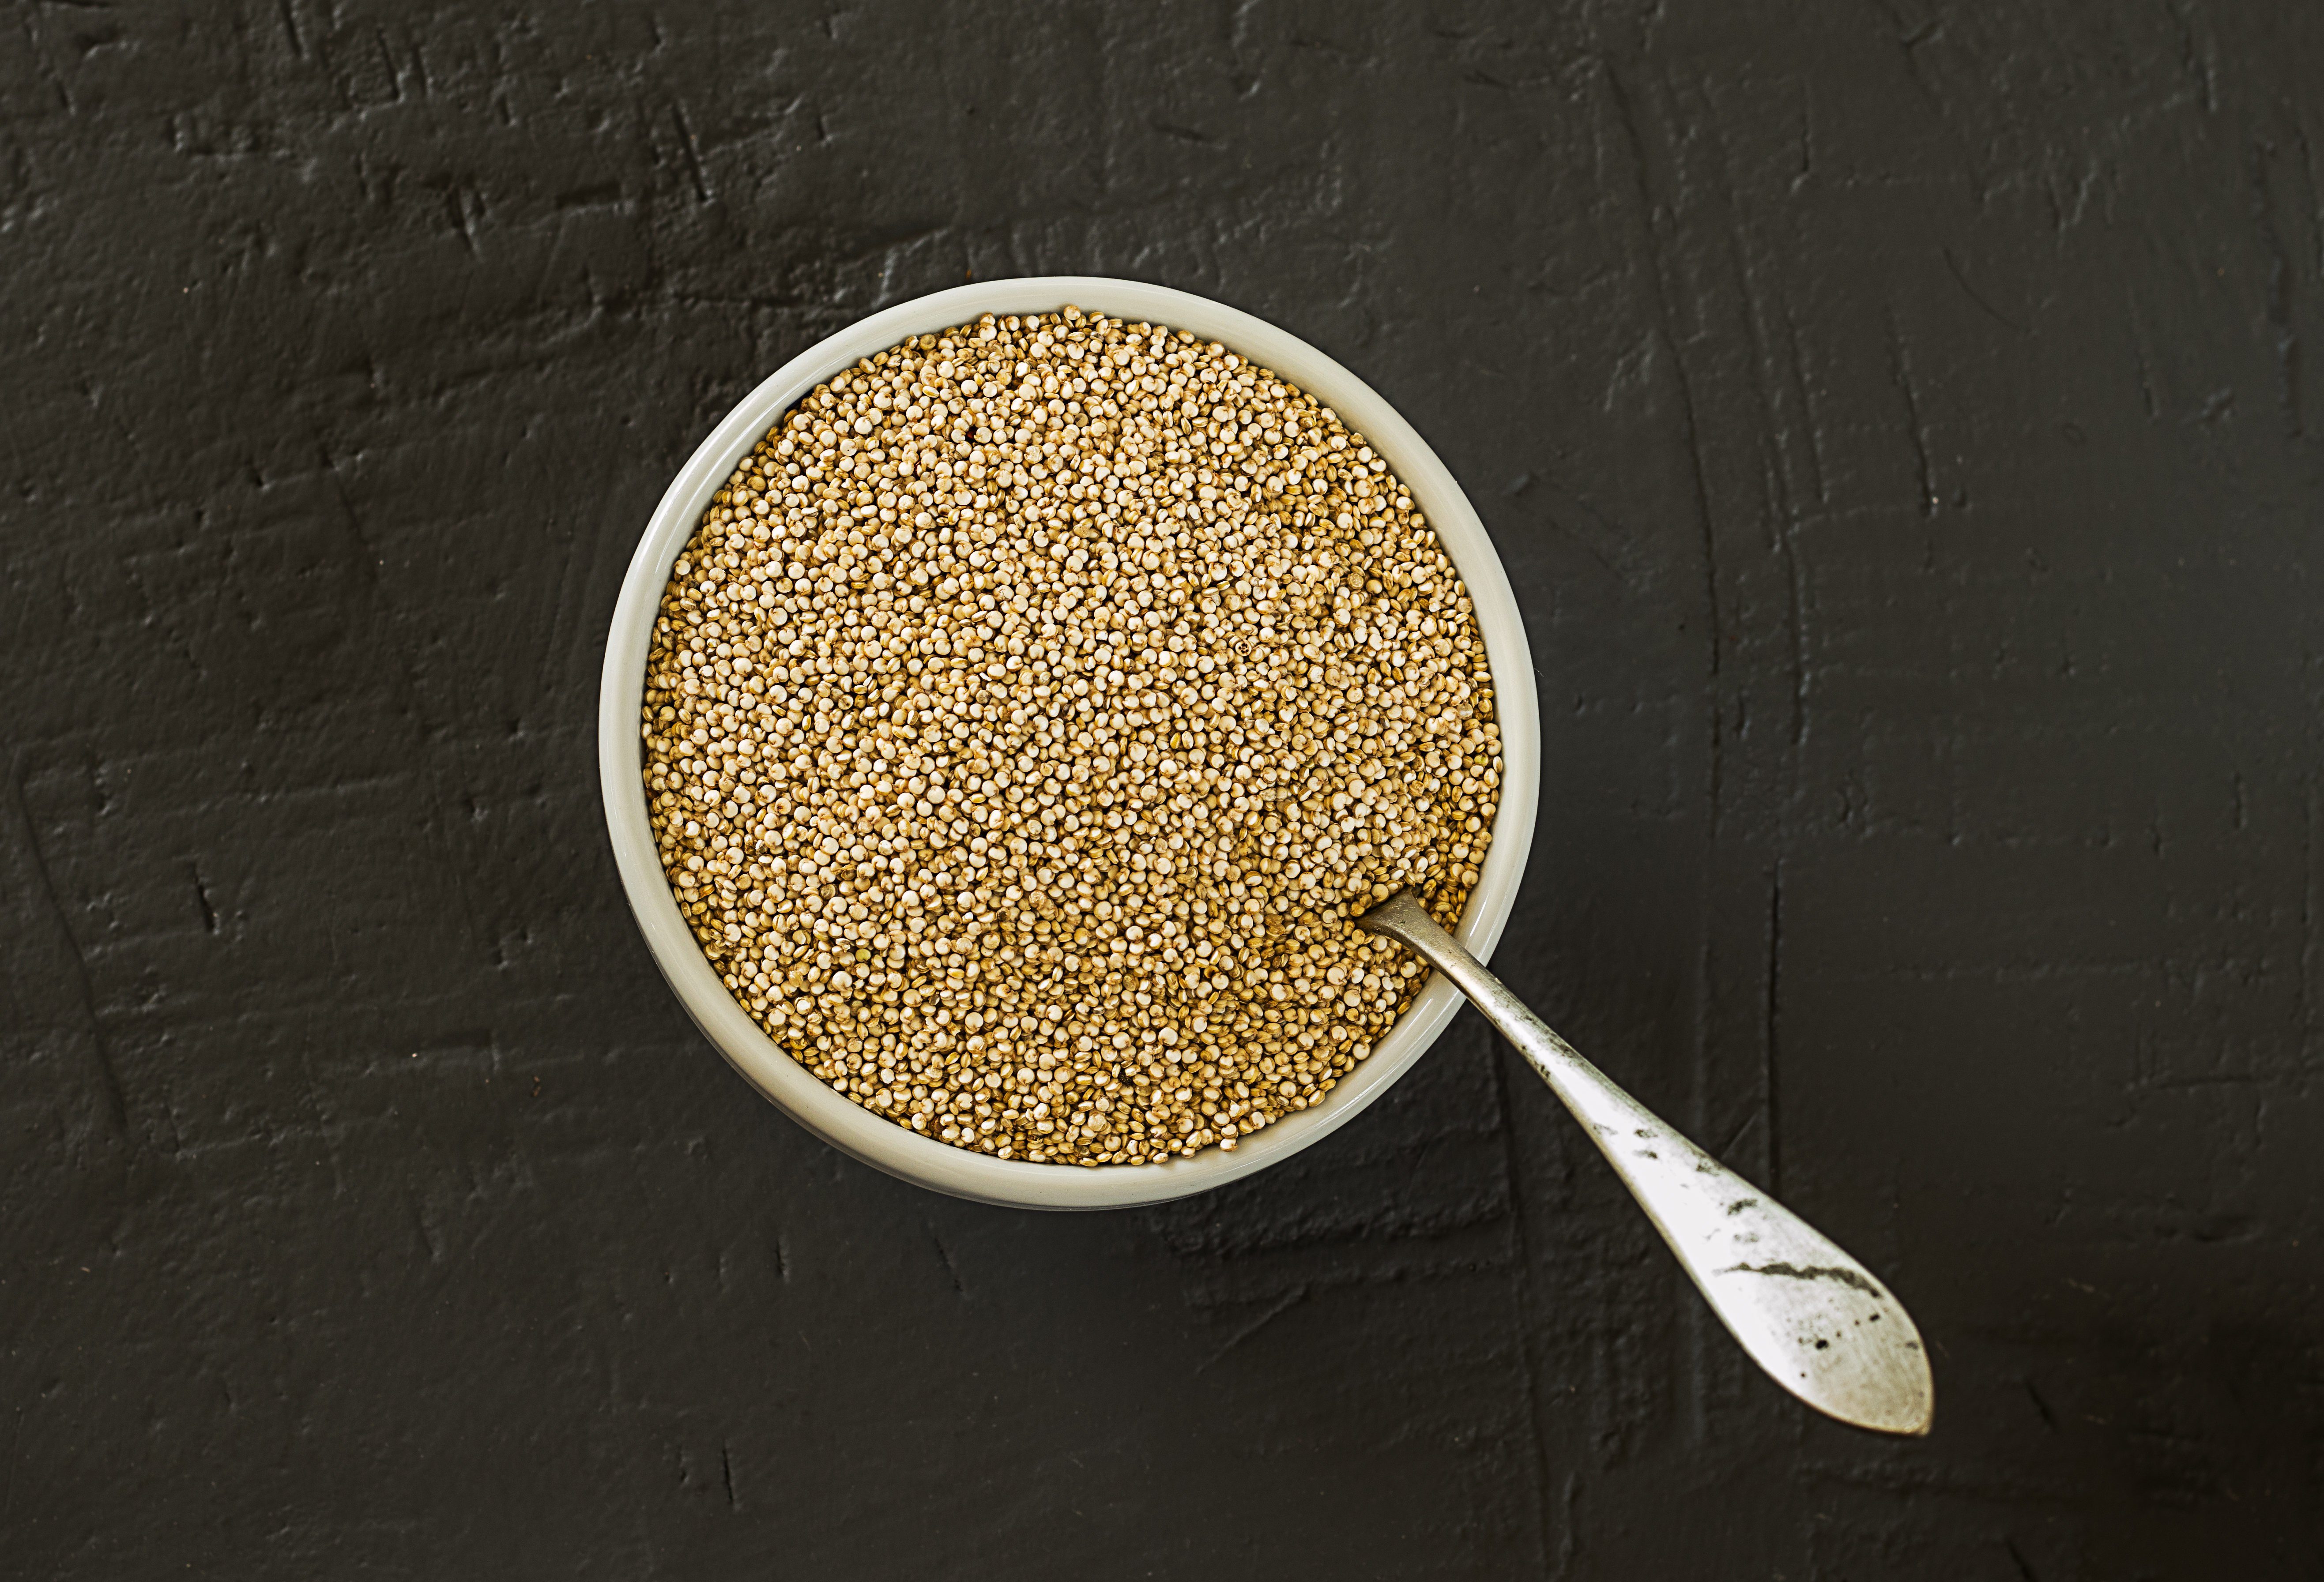 Quinoa seeds in a bowl and spoon. Healthy, protein-rich carbohydrates. Rustic and dark background